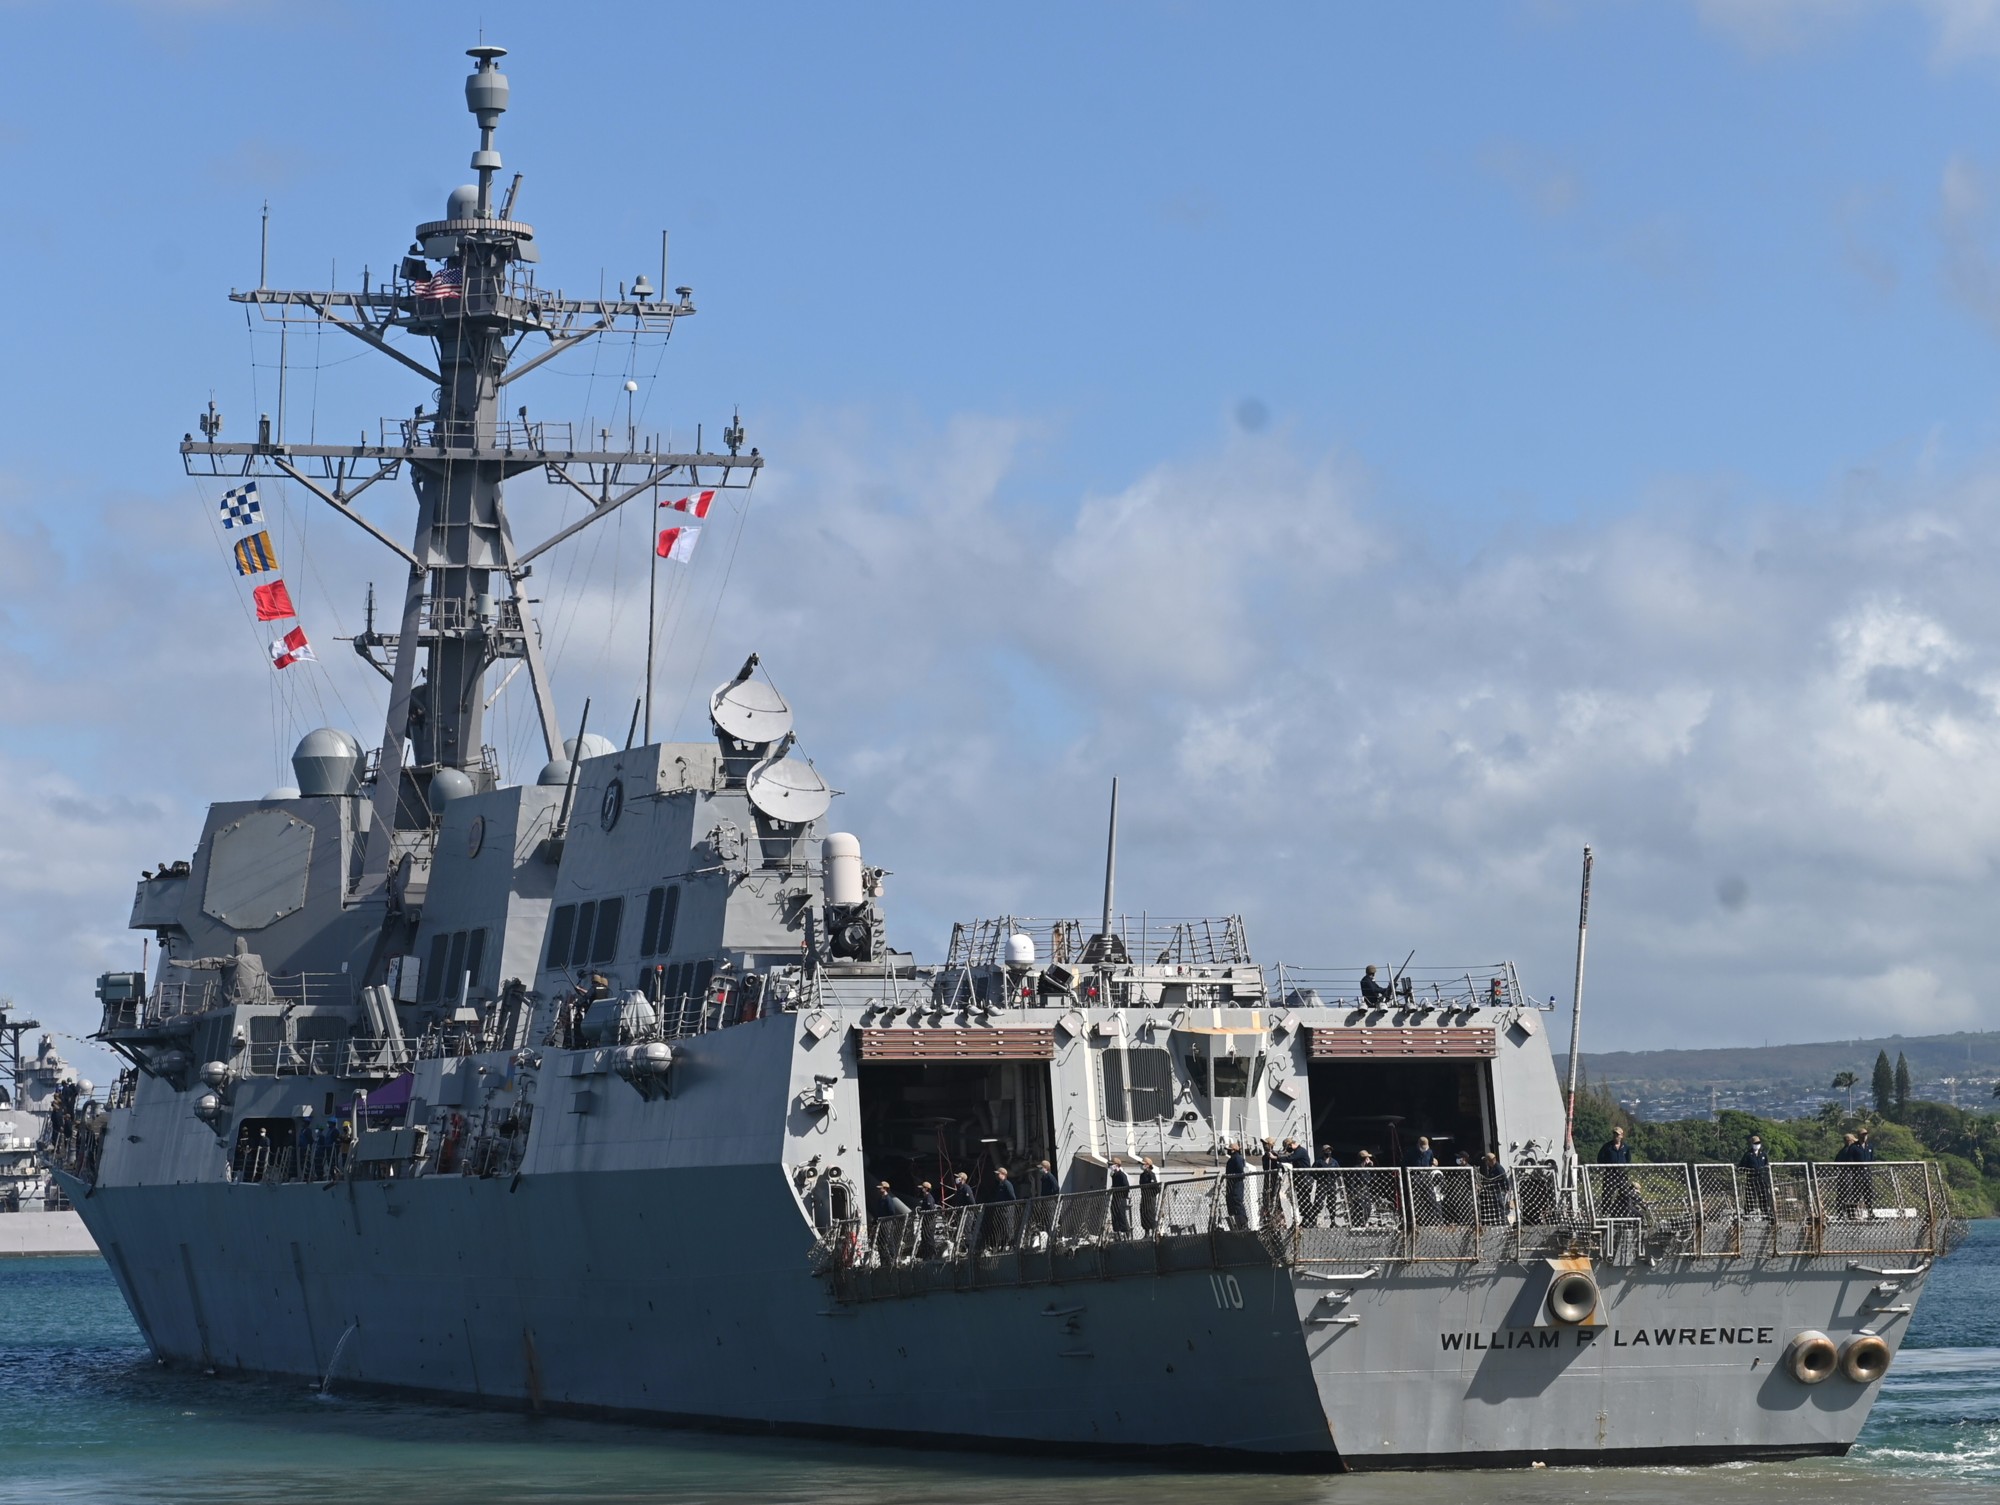 ddg-110 uss william p. lawrence arleigh burke class guided missile destroyer aegis us navy pearl harbor hickam hawaii 61